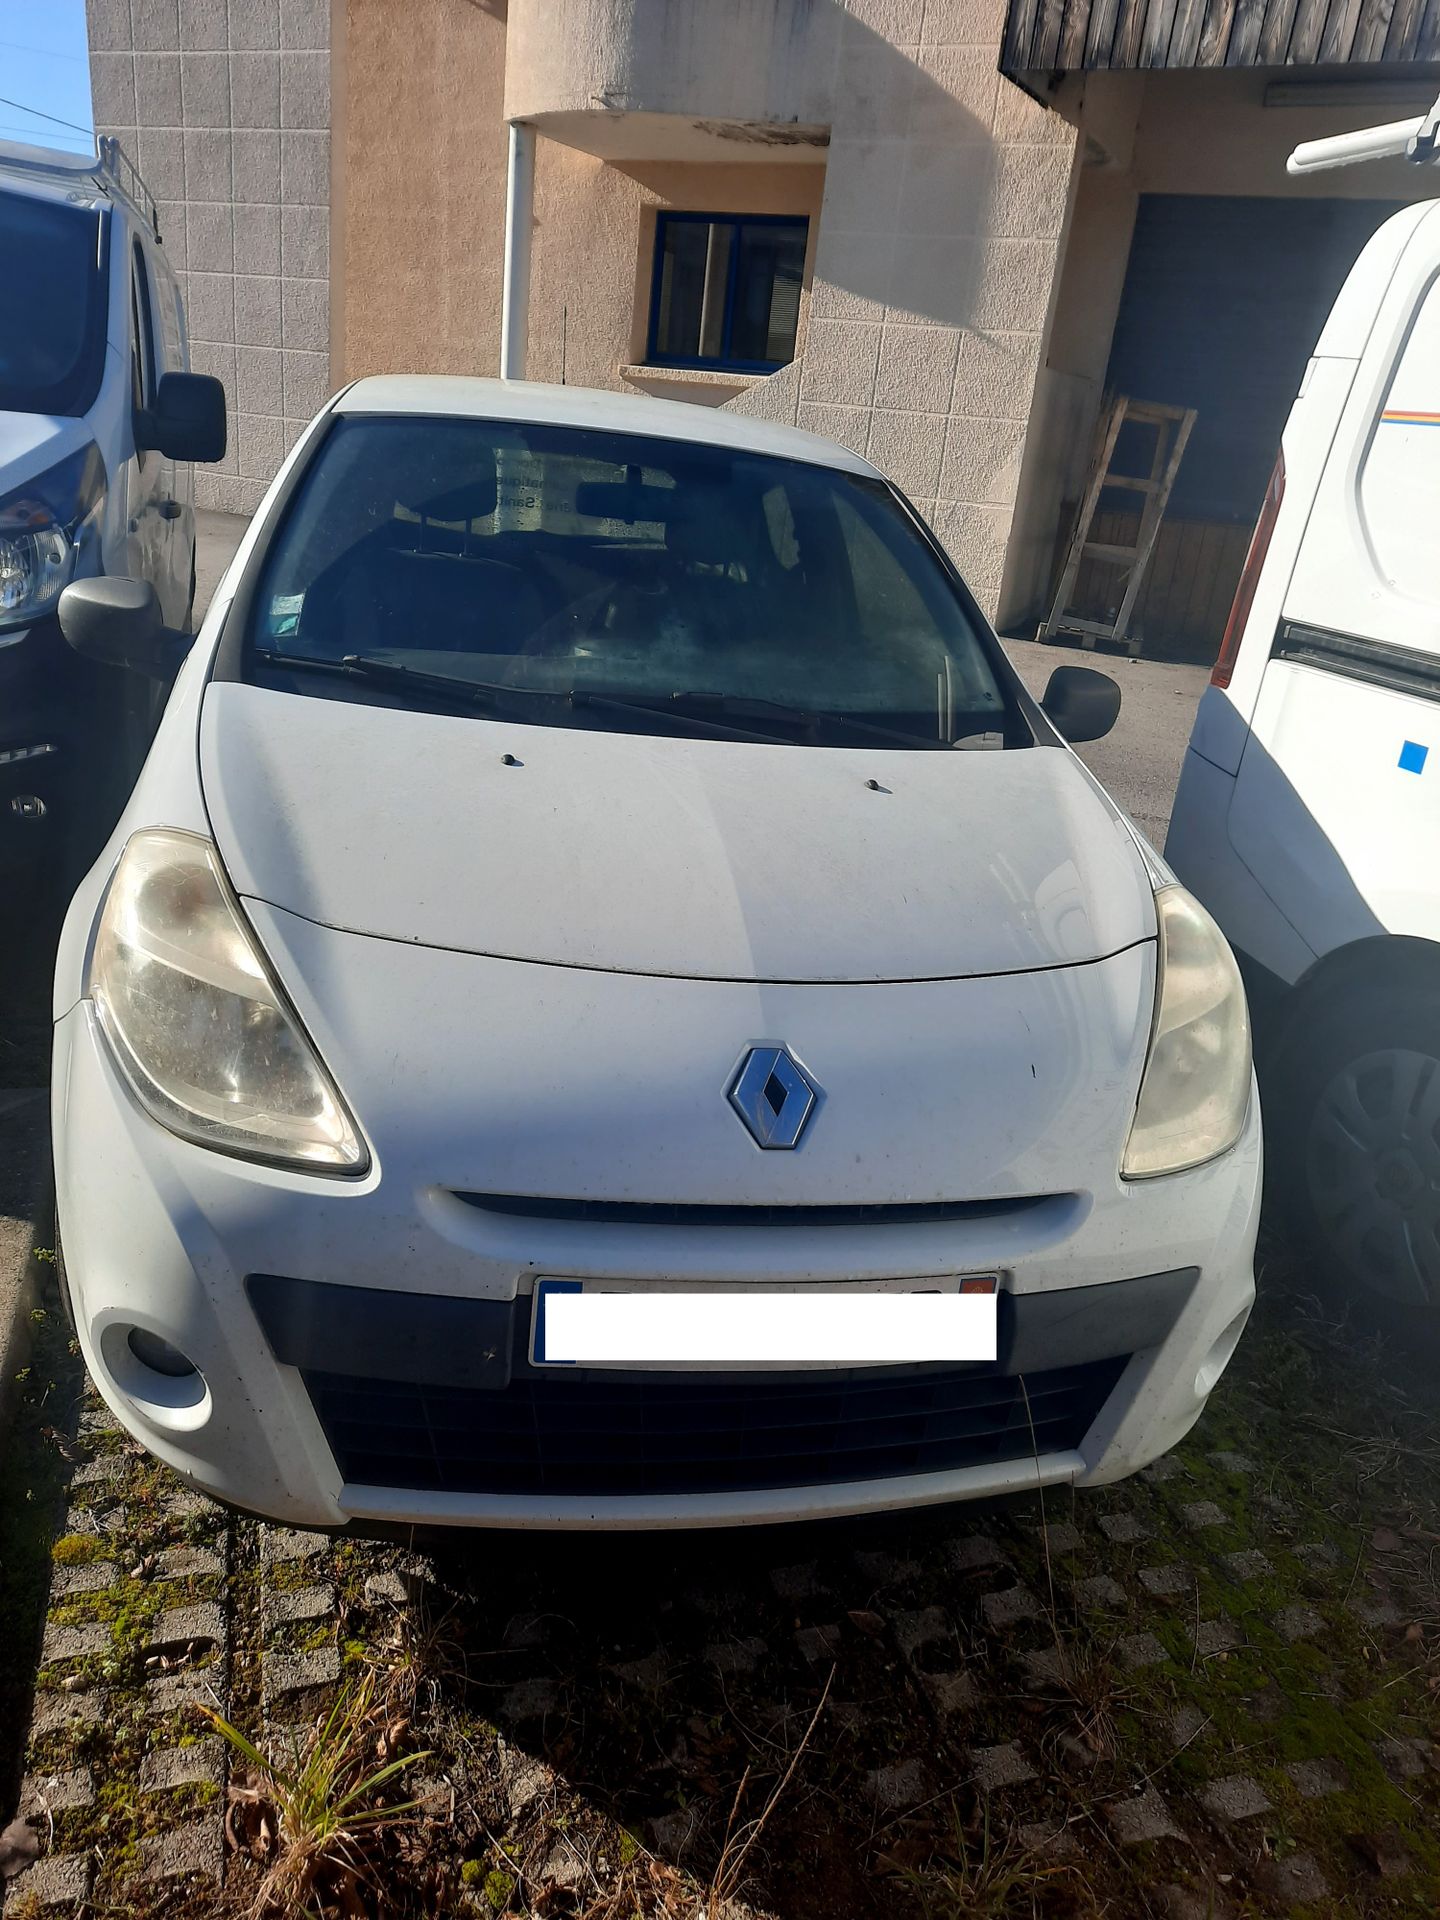 Null 
1 RENAULT Clio III commercial vehicle, registration BM 278 TD, year 29/04/&hellip;